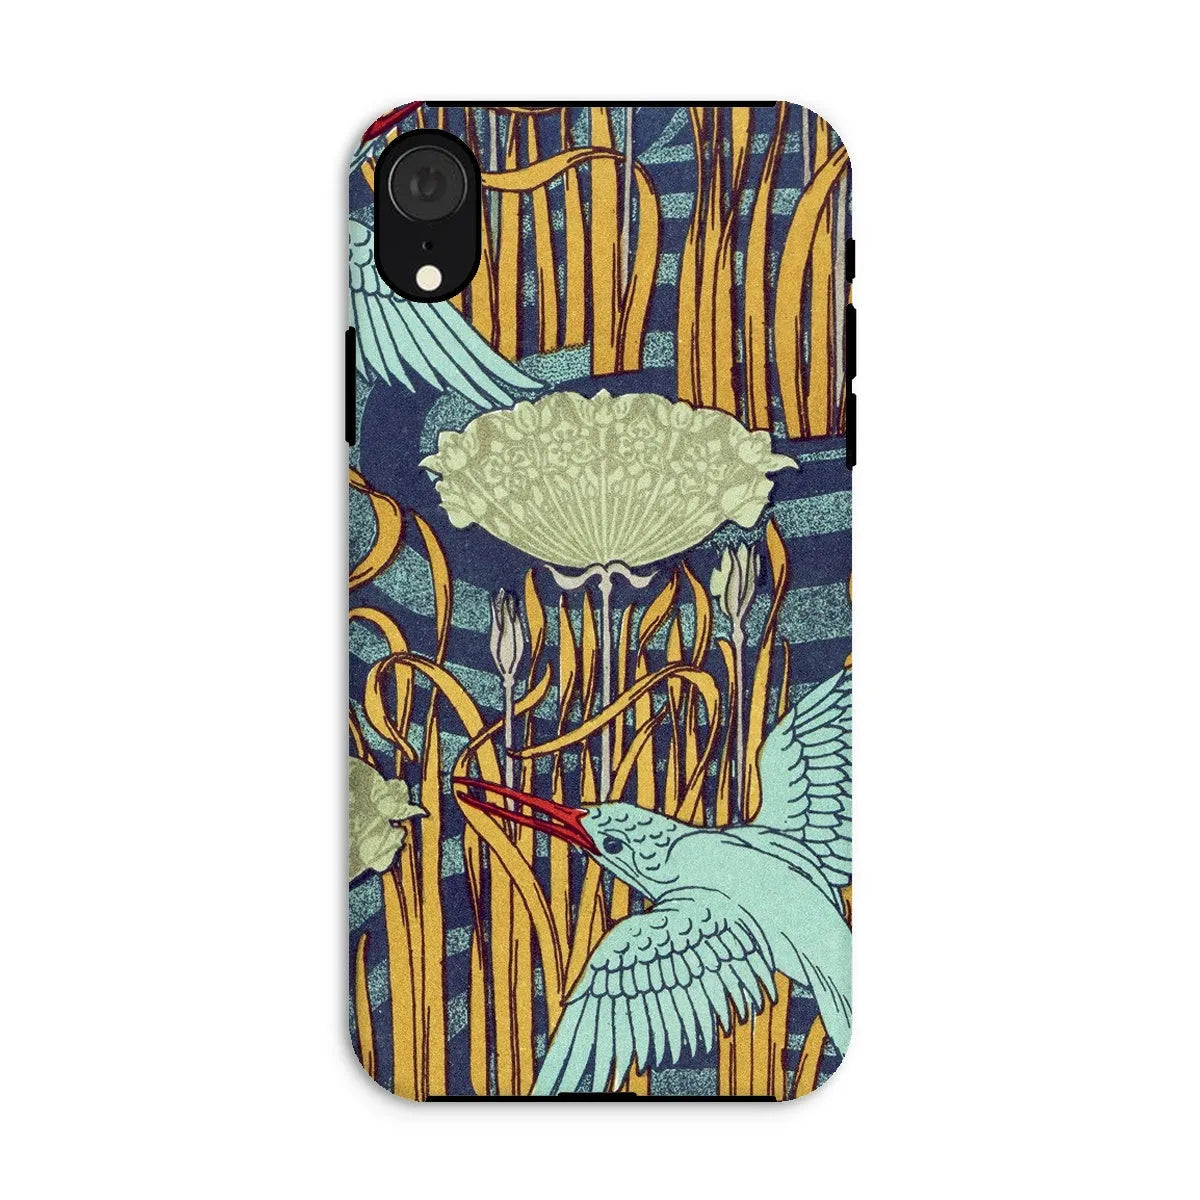 Kingfishers French Art Phone Case - Maurice Pillard Verneuil - Iphone Xr / Matte - Mobile Phone Cases - Aesthetic Art